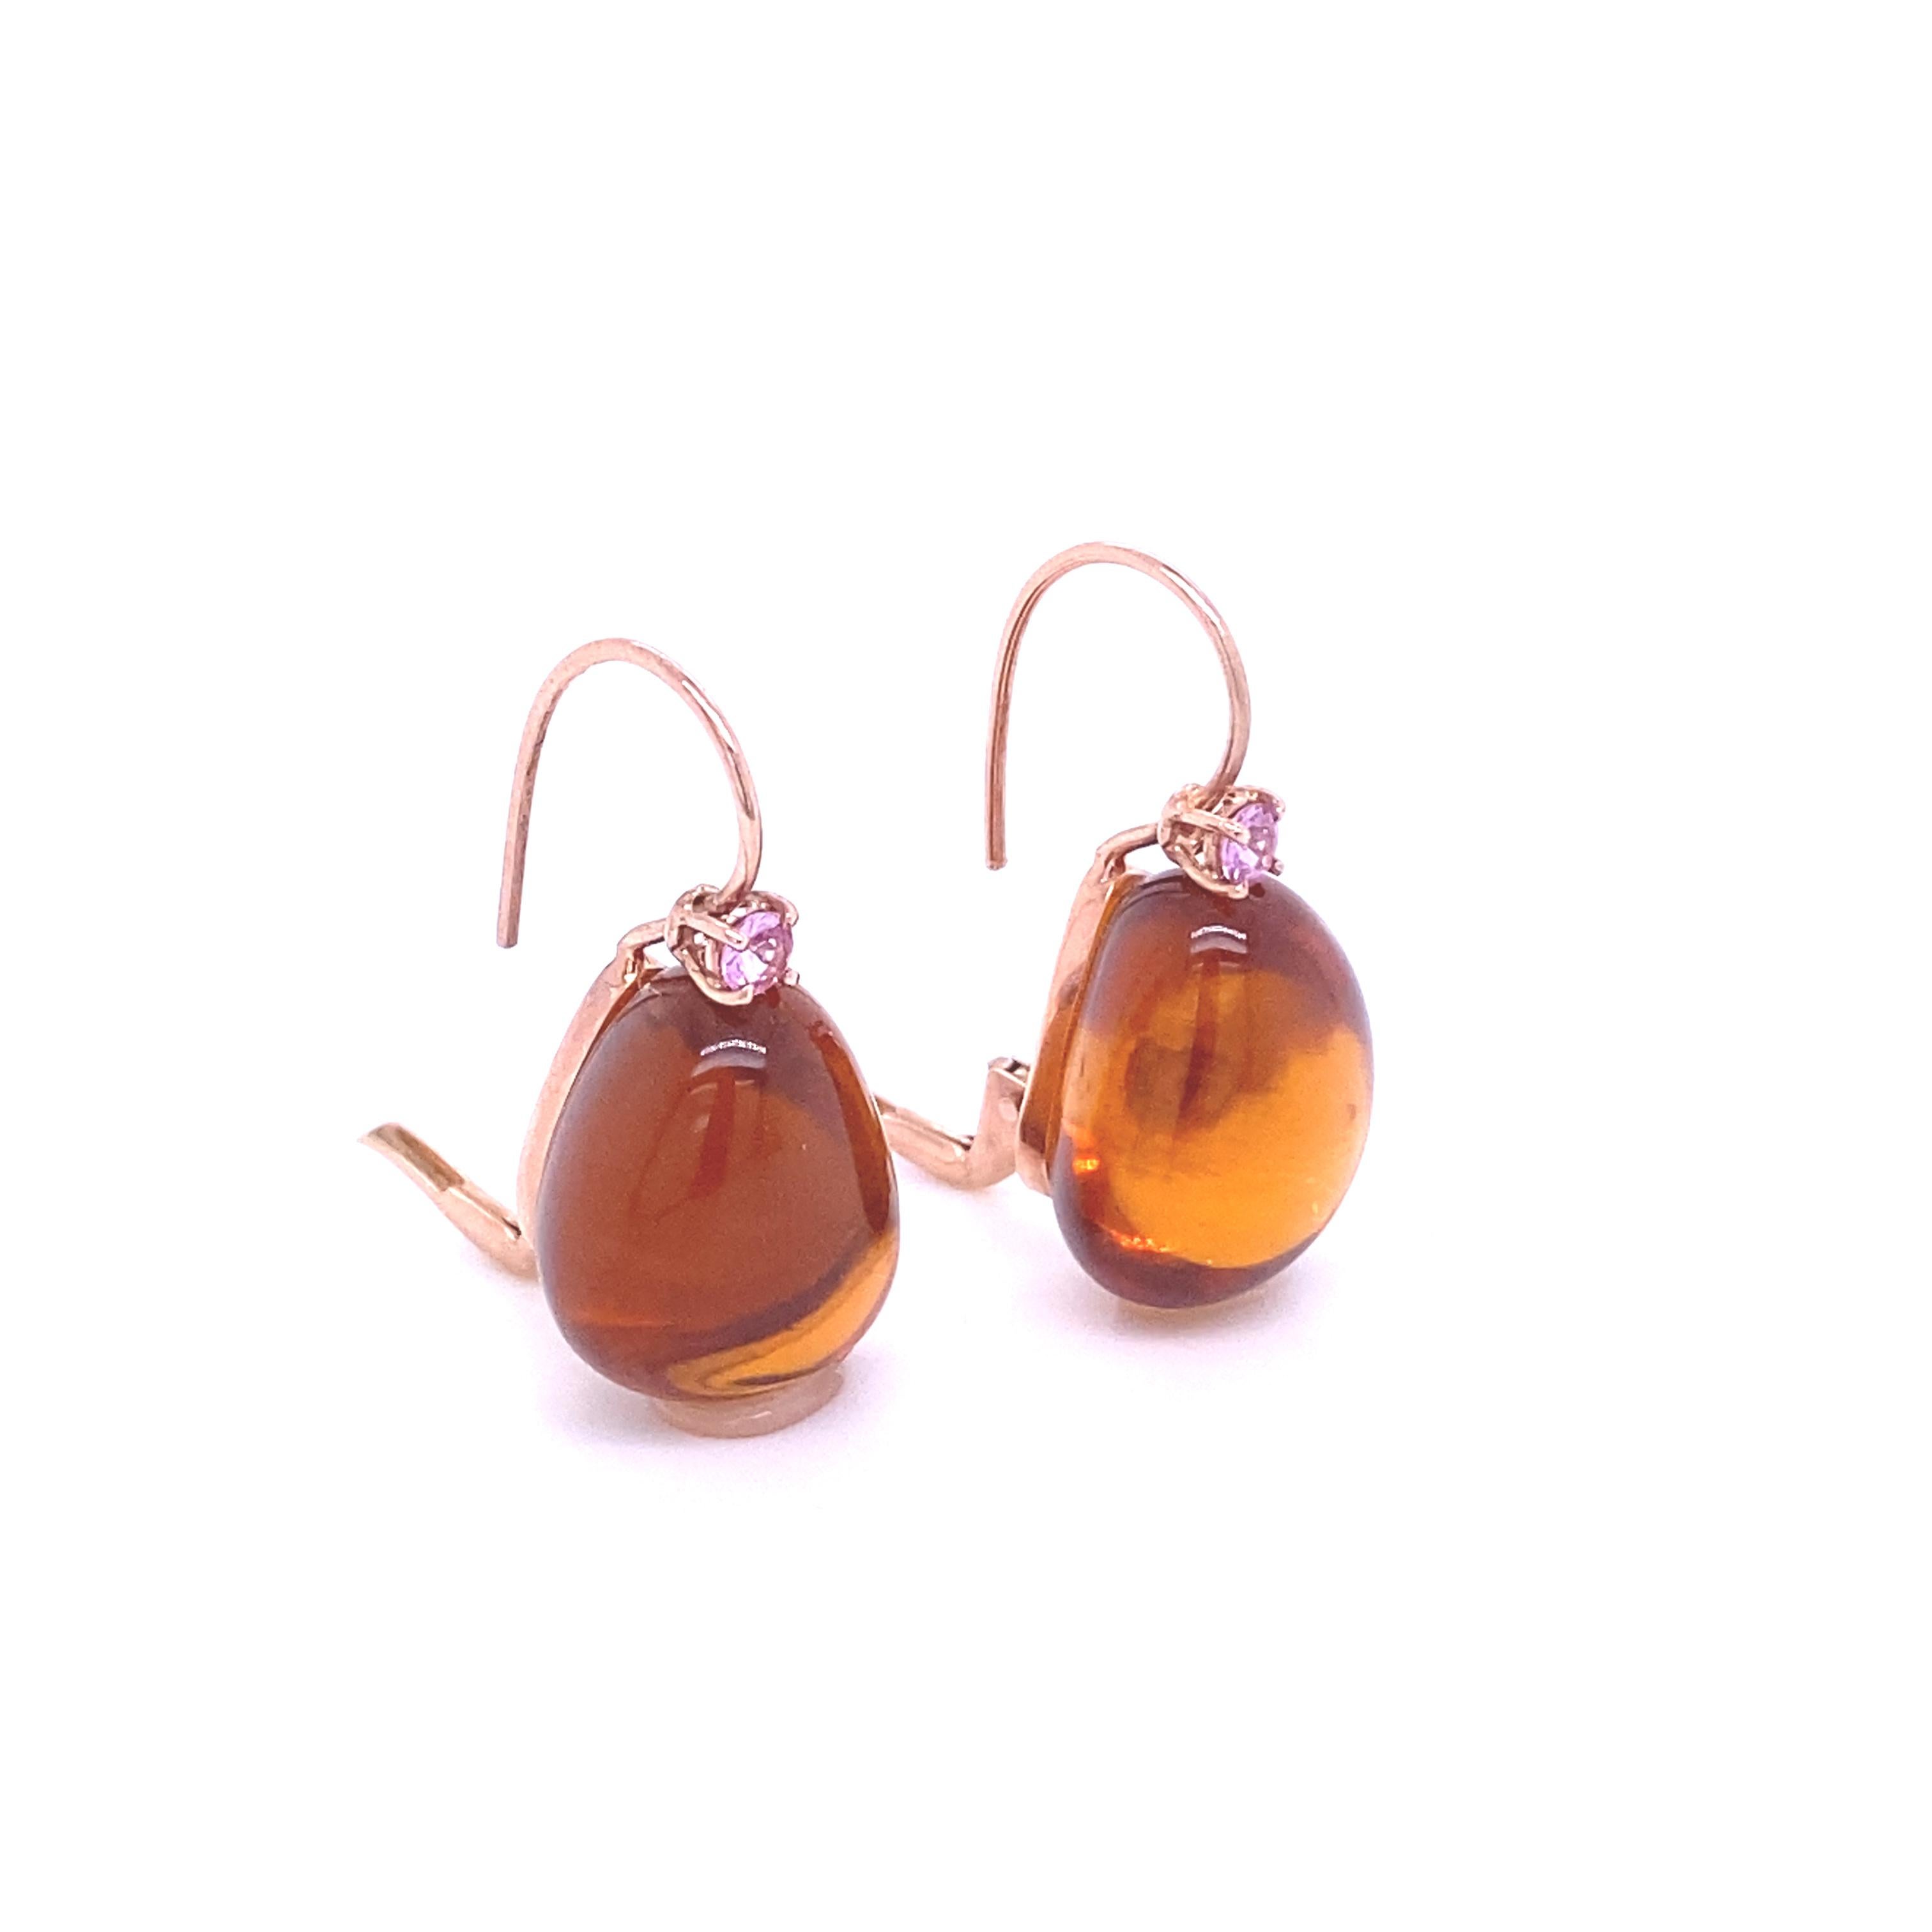 Rose Gold Earrings Citrine, Pink Sapphire
French Collection by Mesure et Art du Temps.

Sleeper earrings in 18 Carat pink gold accompanied by a single size citrine with a pink sapphire. And the whole is based on a mother-of-pearl which allows the